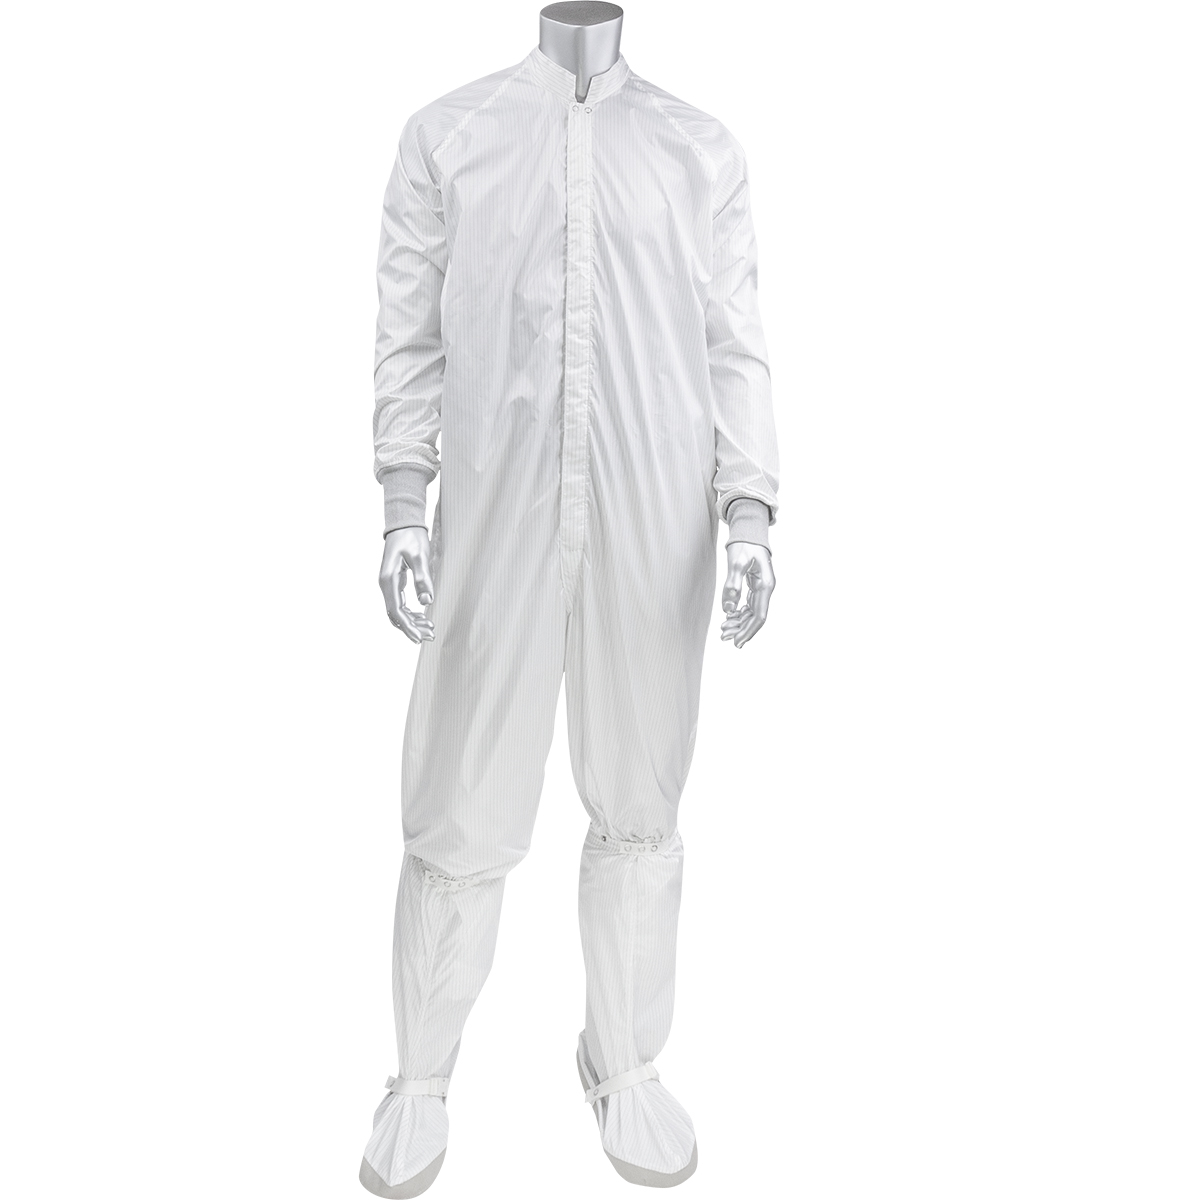 CC1245-16WH  Uniform Technology™ Ultimax Stripe ISO 3 (Class 1) Cleanroom Coveralls